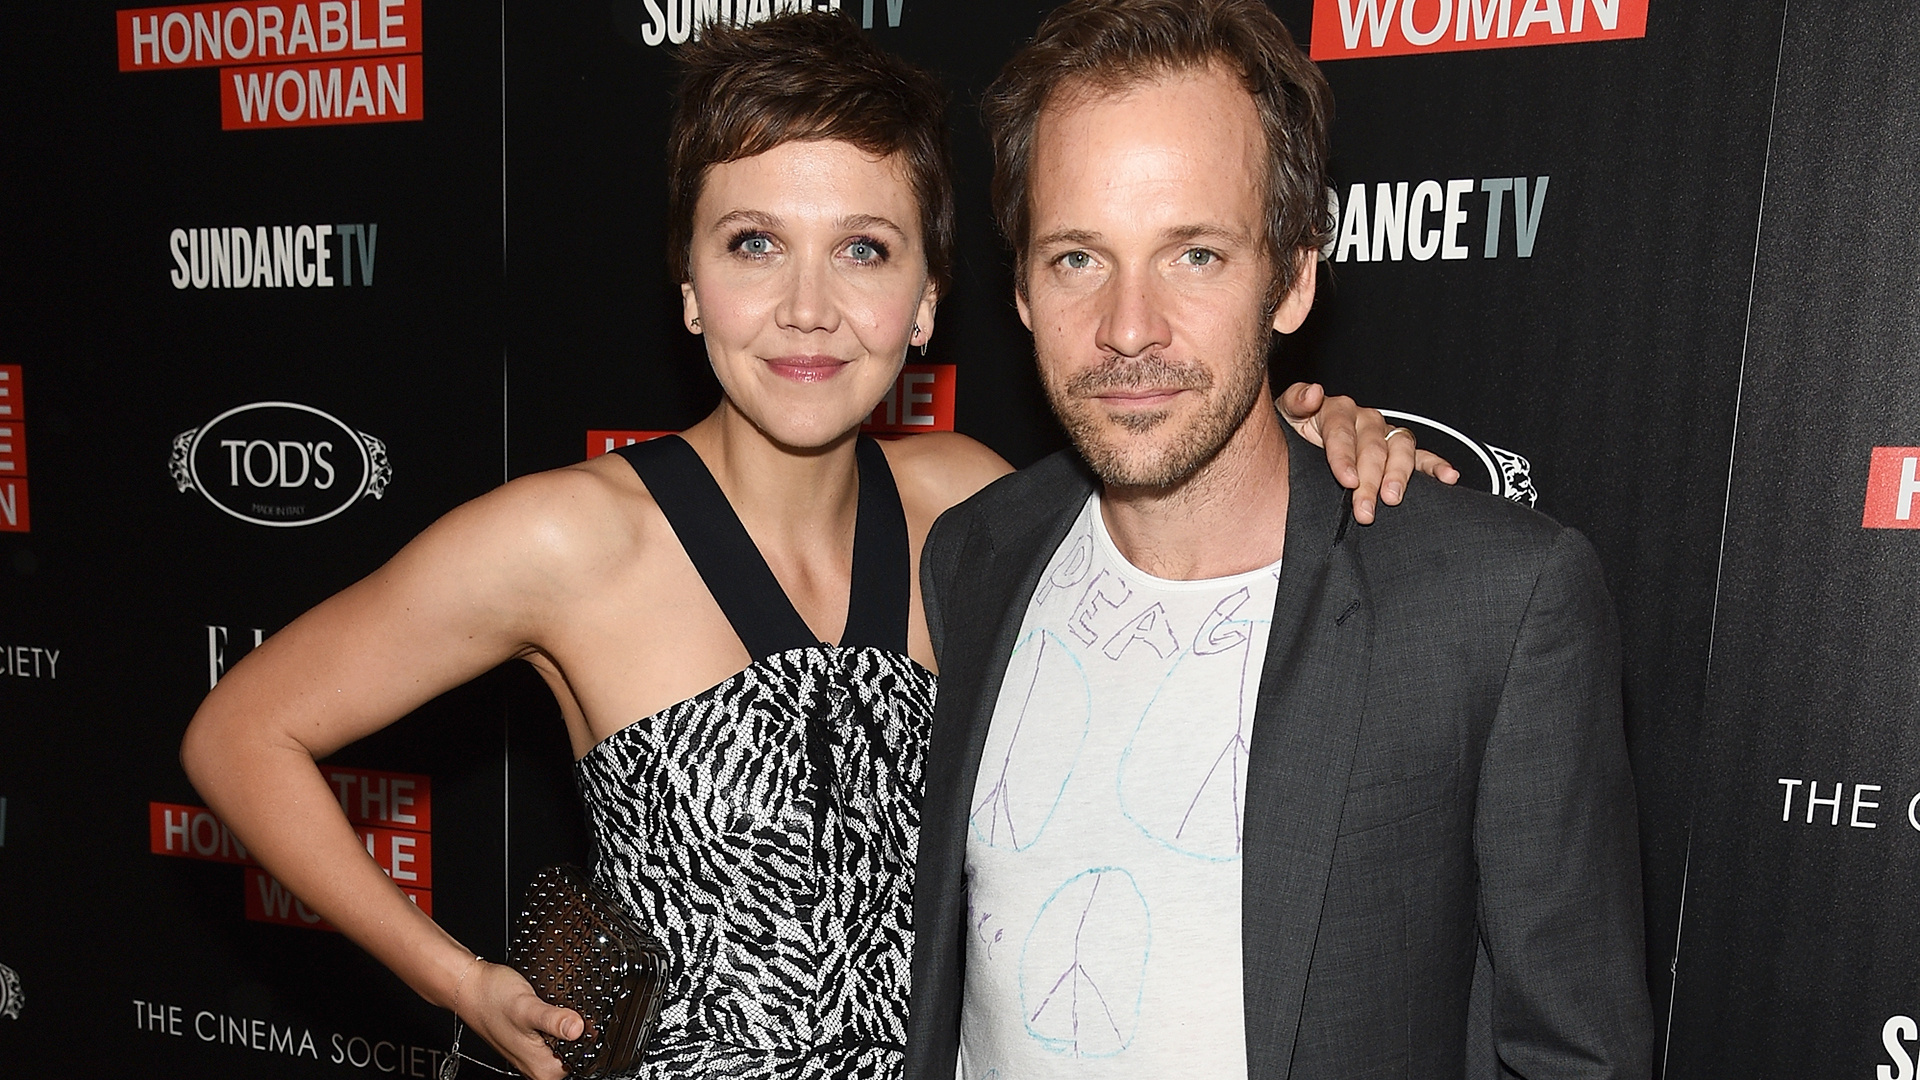 Maggie Gyllenhaal and Peter Sarsgaard Promote Peace at 'The Honorable Woman' Premiere - Variety 1920x1080